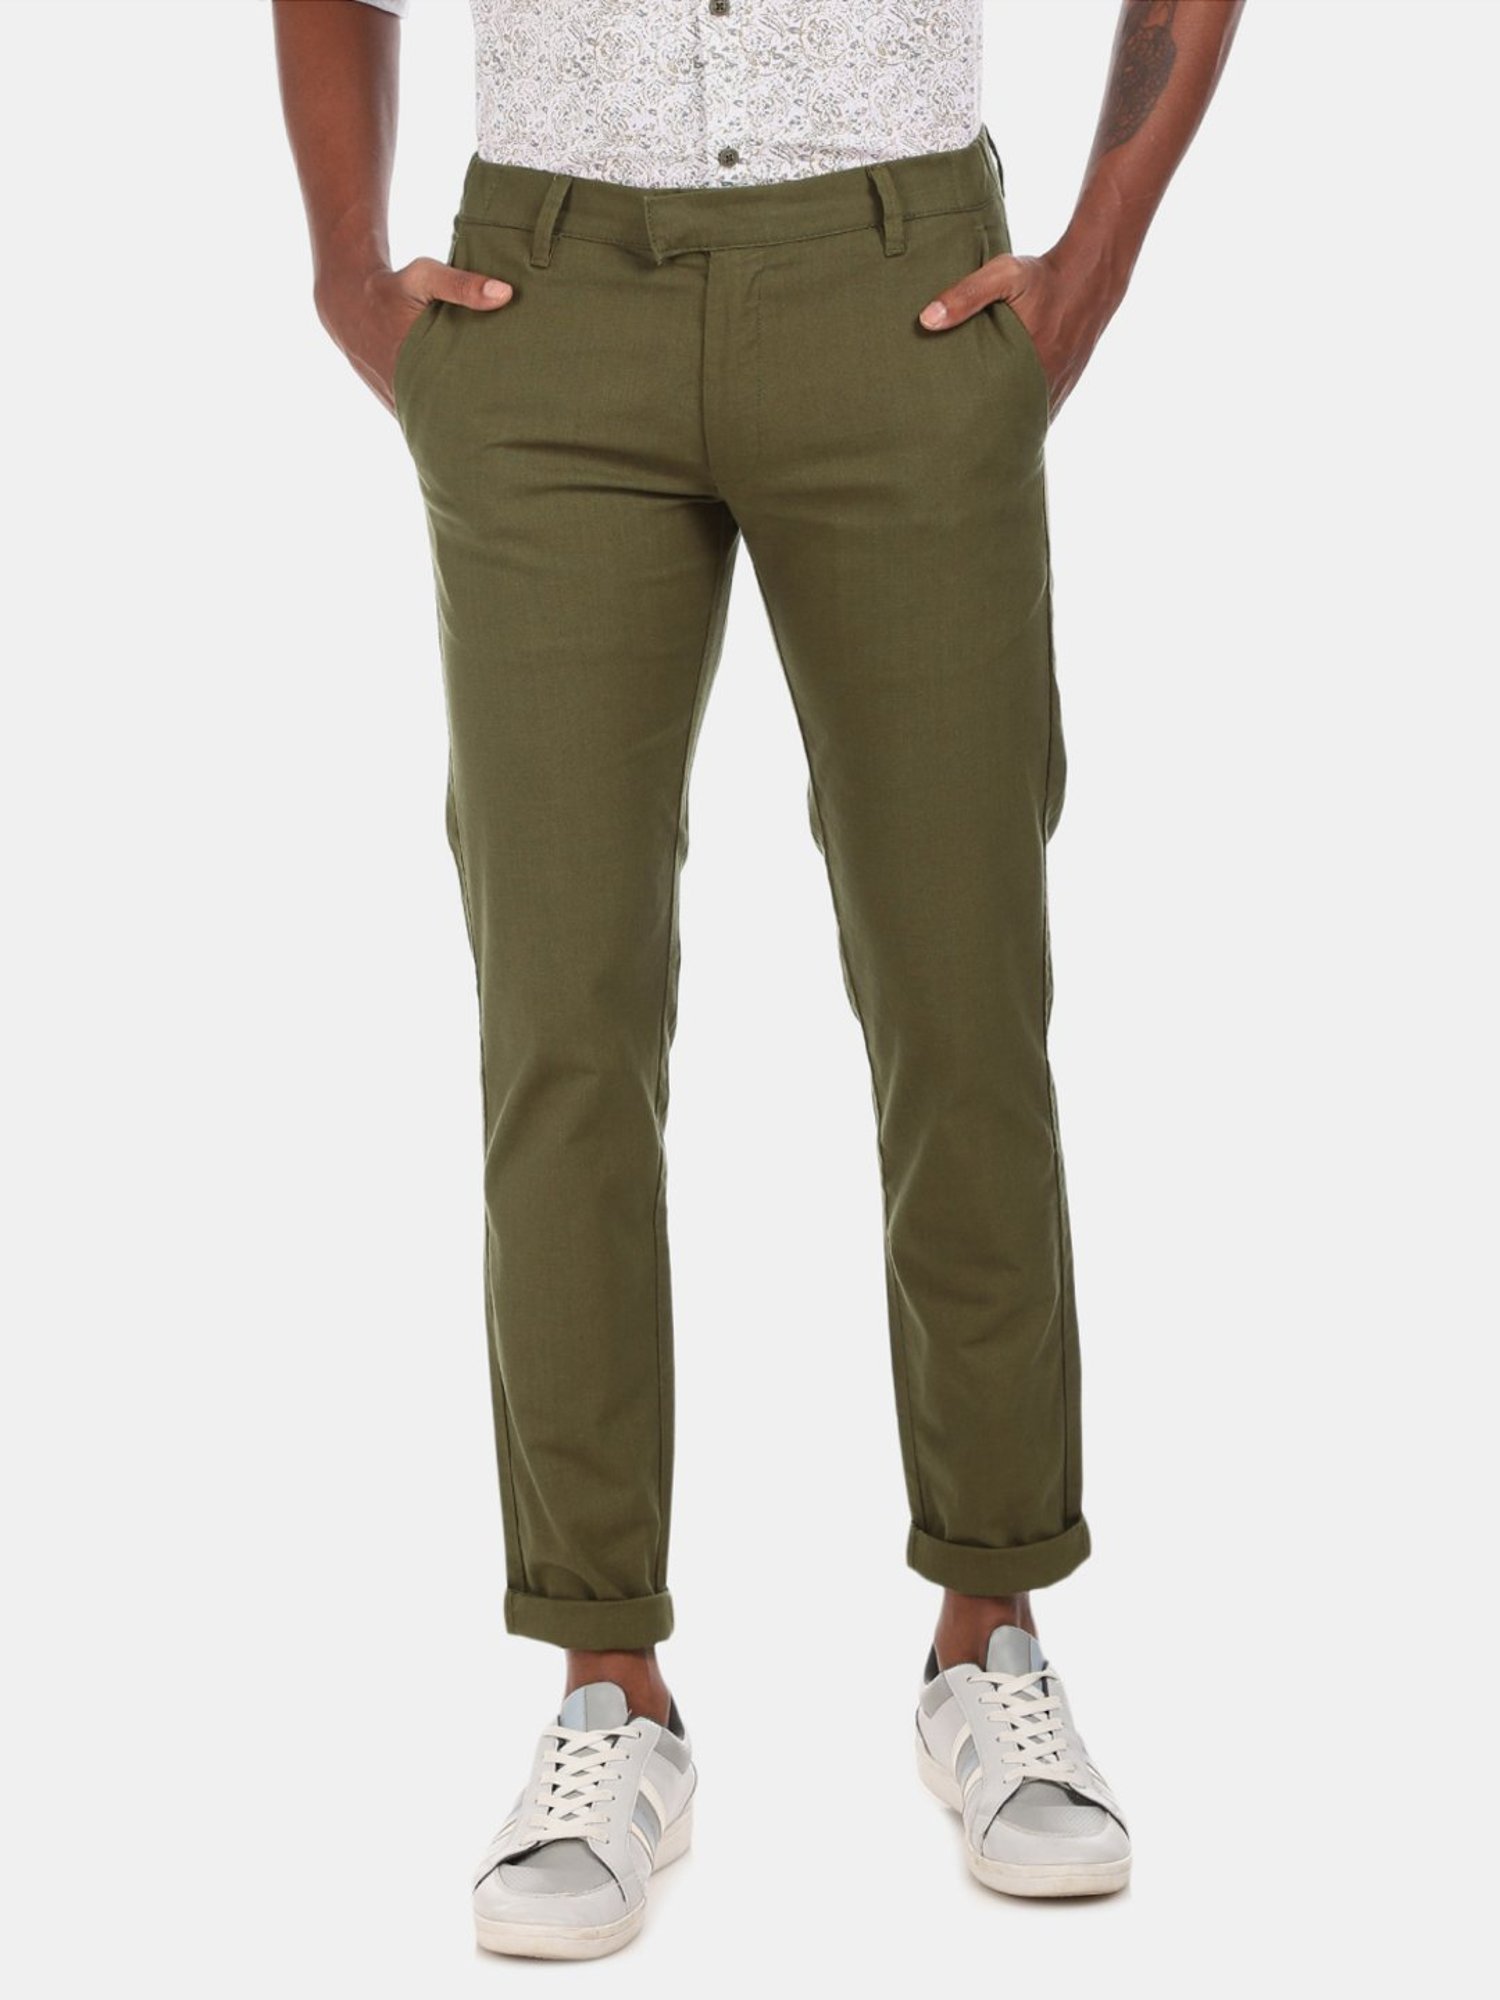 Buy OLIVE GREEN Trousers  Pants for Men by max Online  Ajiocom